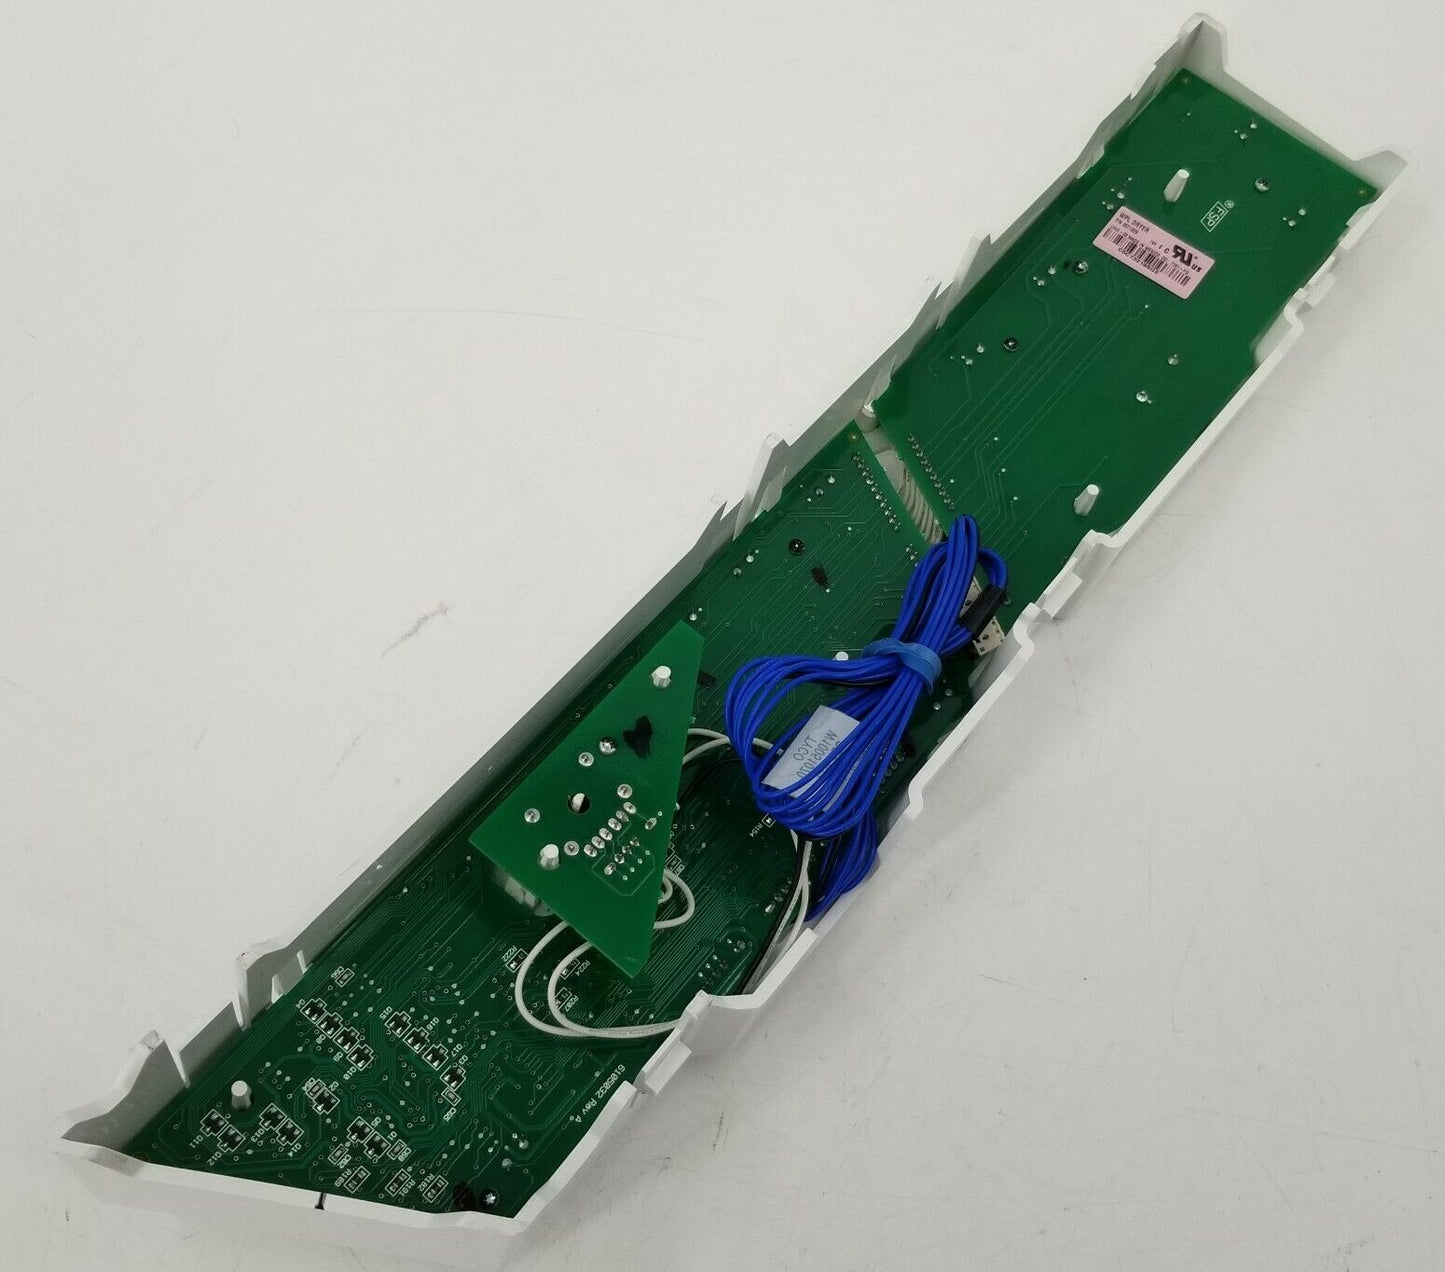 Genuine OEM Replacement for Whirlpool Dryer Display 8571954 8571955 8571929